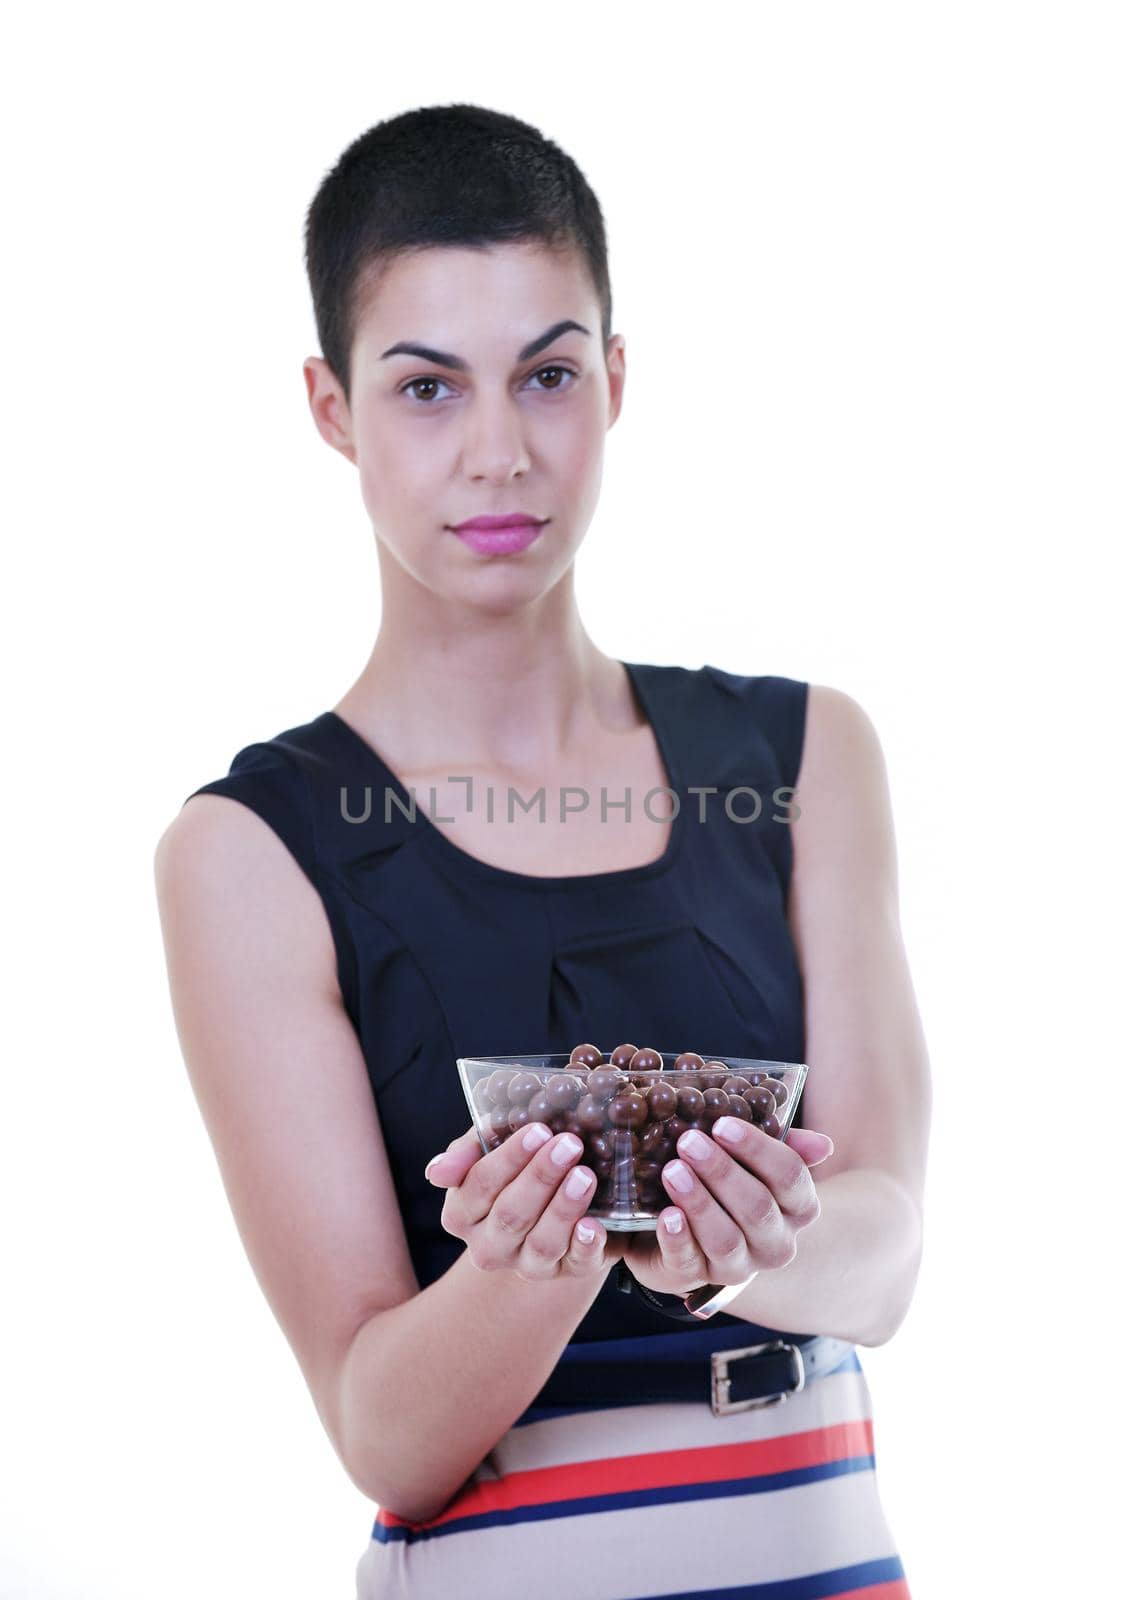 young lady isoladet on white background hold tasty chocolate cup